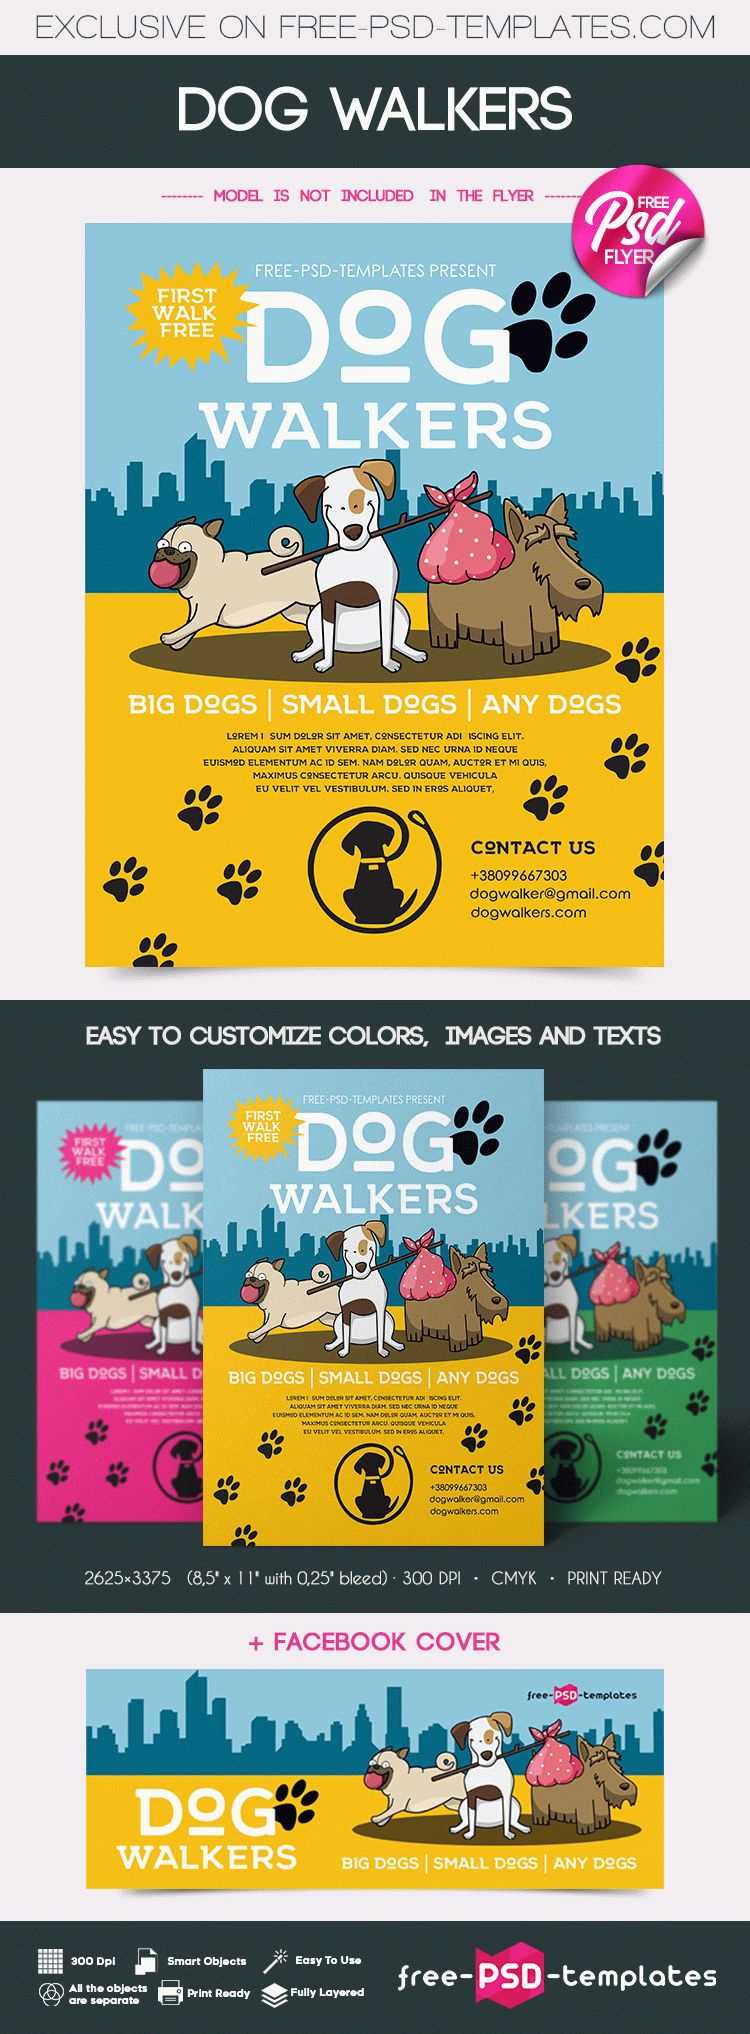 Free Dog Walkers Flyer In Psd | Free Psd Templates Throughout Dog Walking Flyer Template